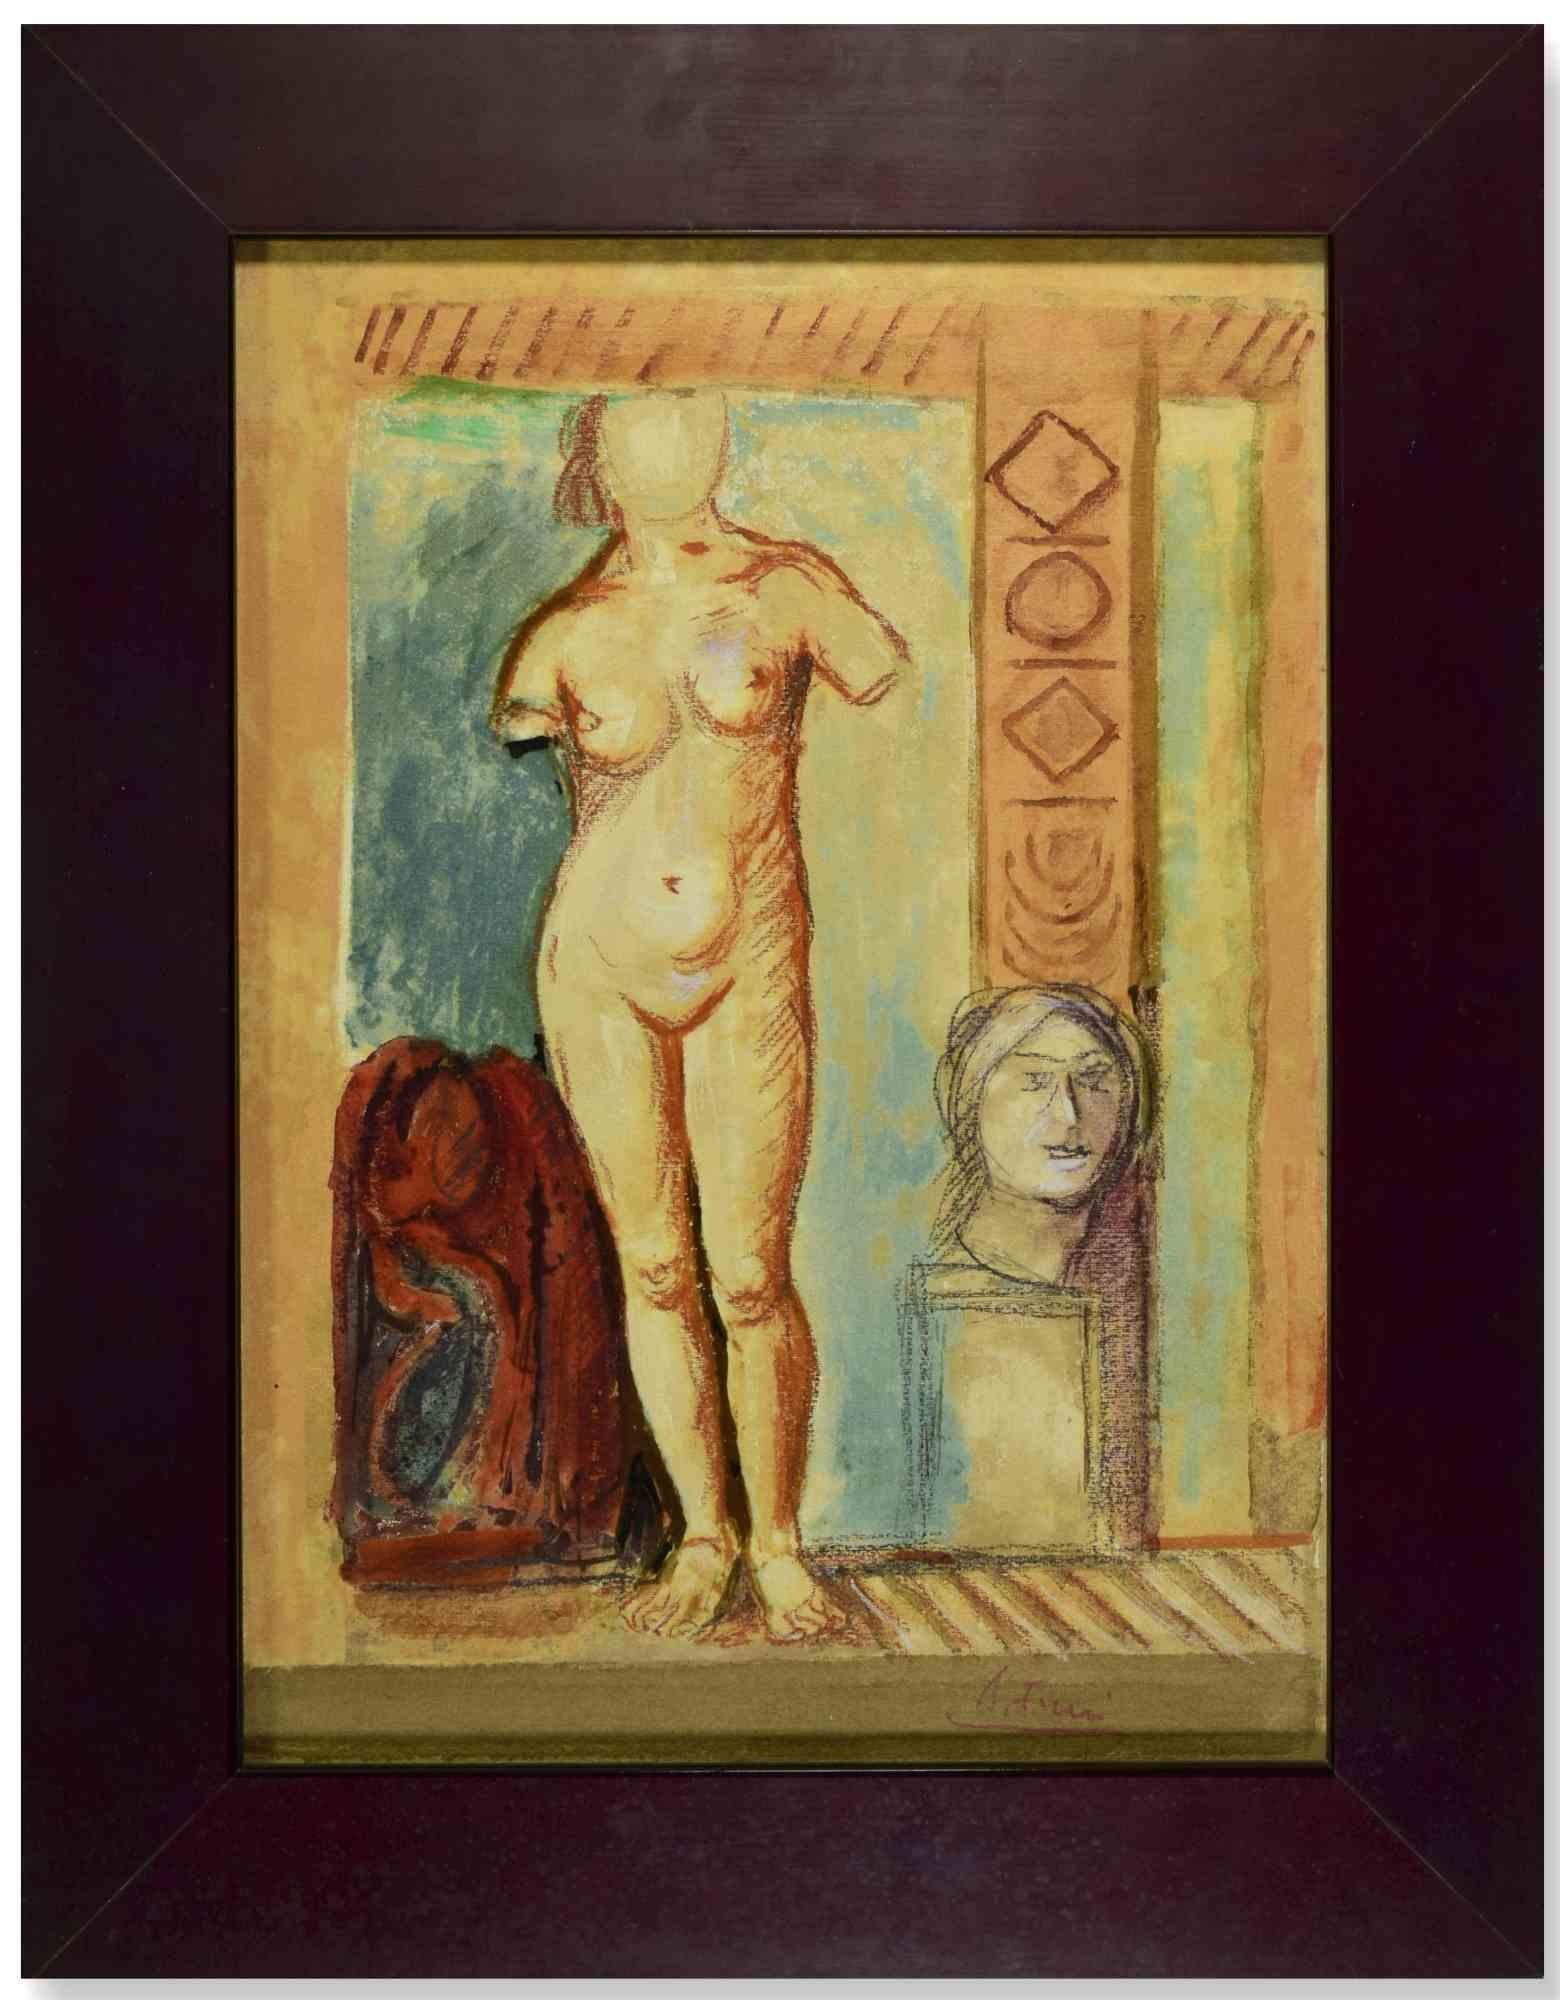 Woman nude is a modern artwork realized by Achille Funi in the early 20th Century.

Mixed media on plywood.

Hand signed on the lower margin.

Includes frame.